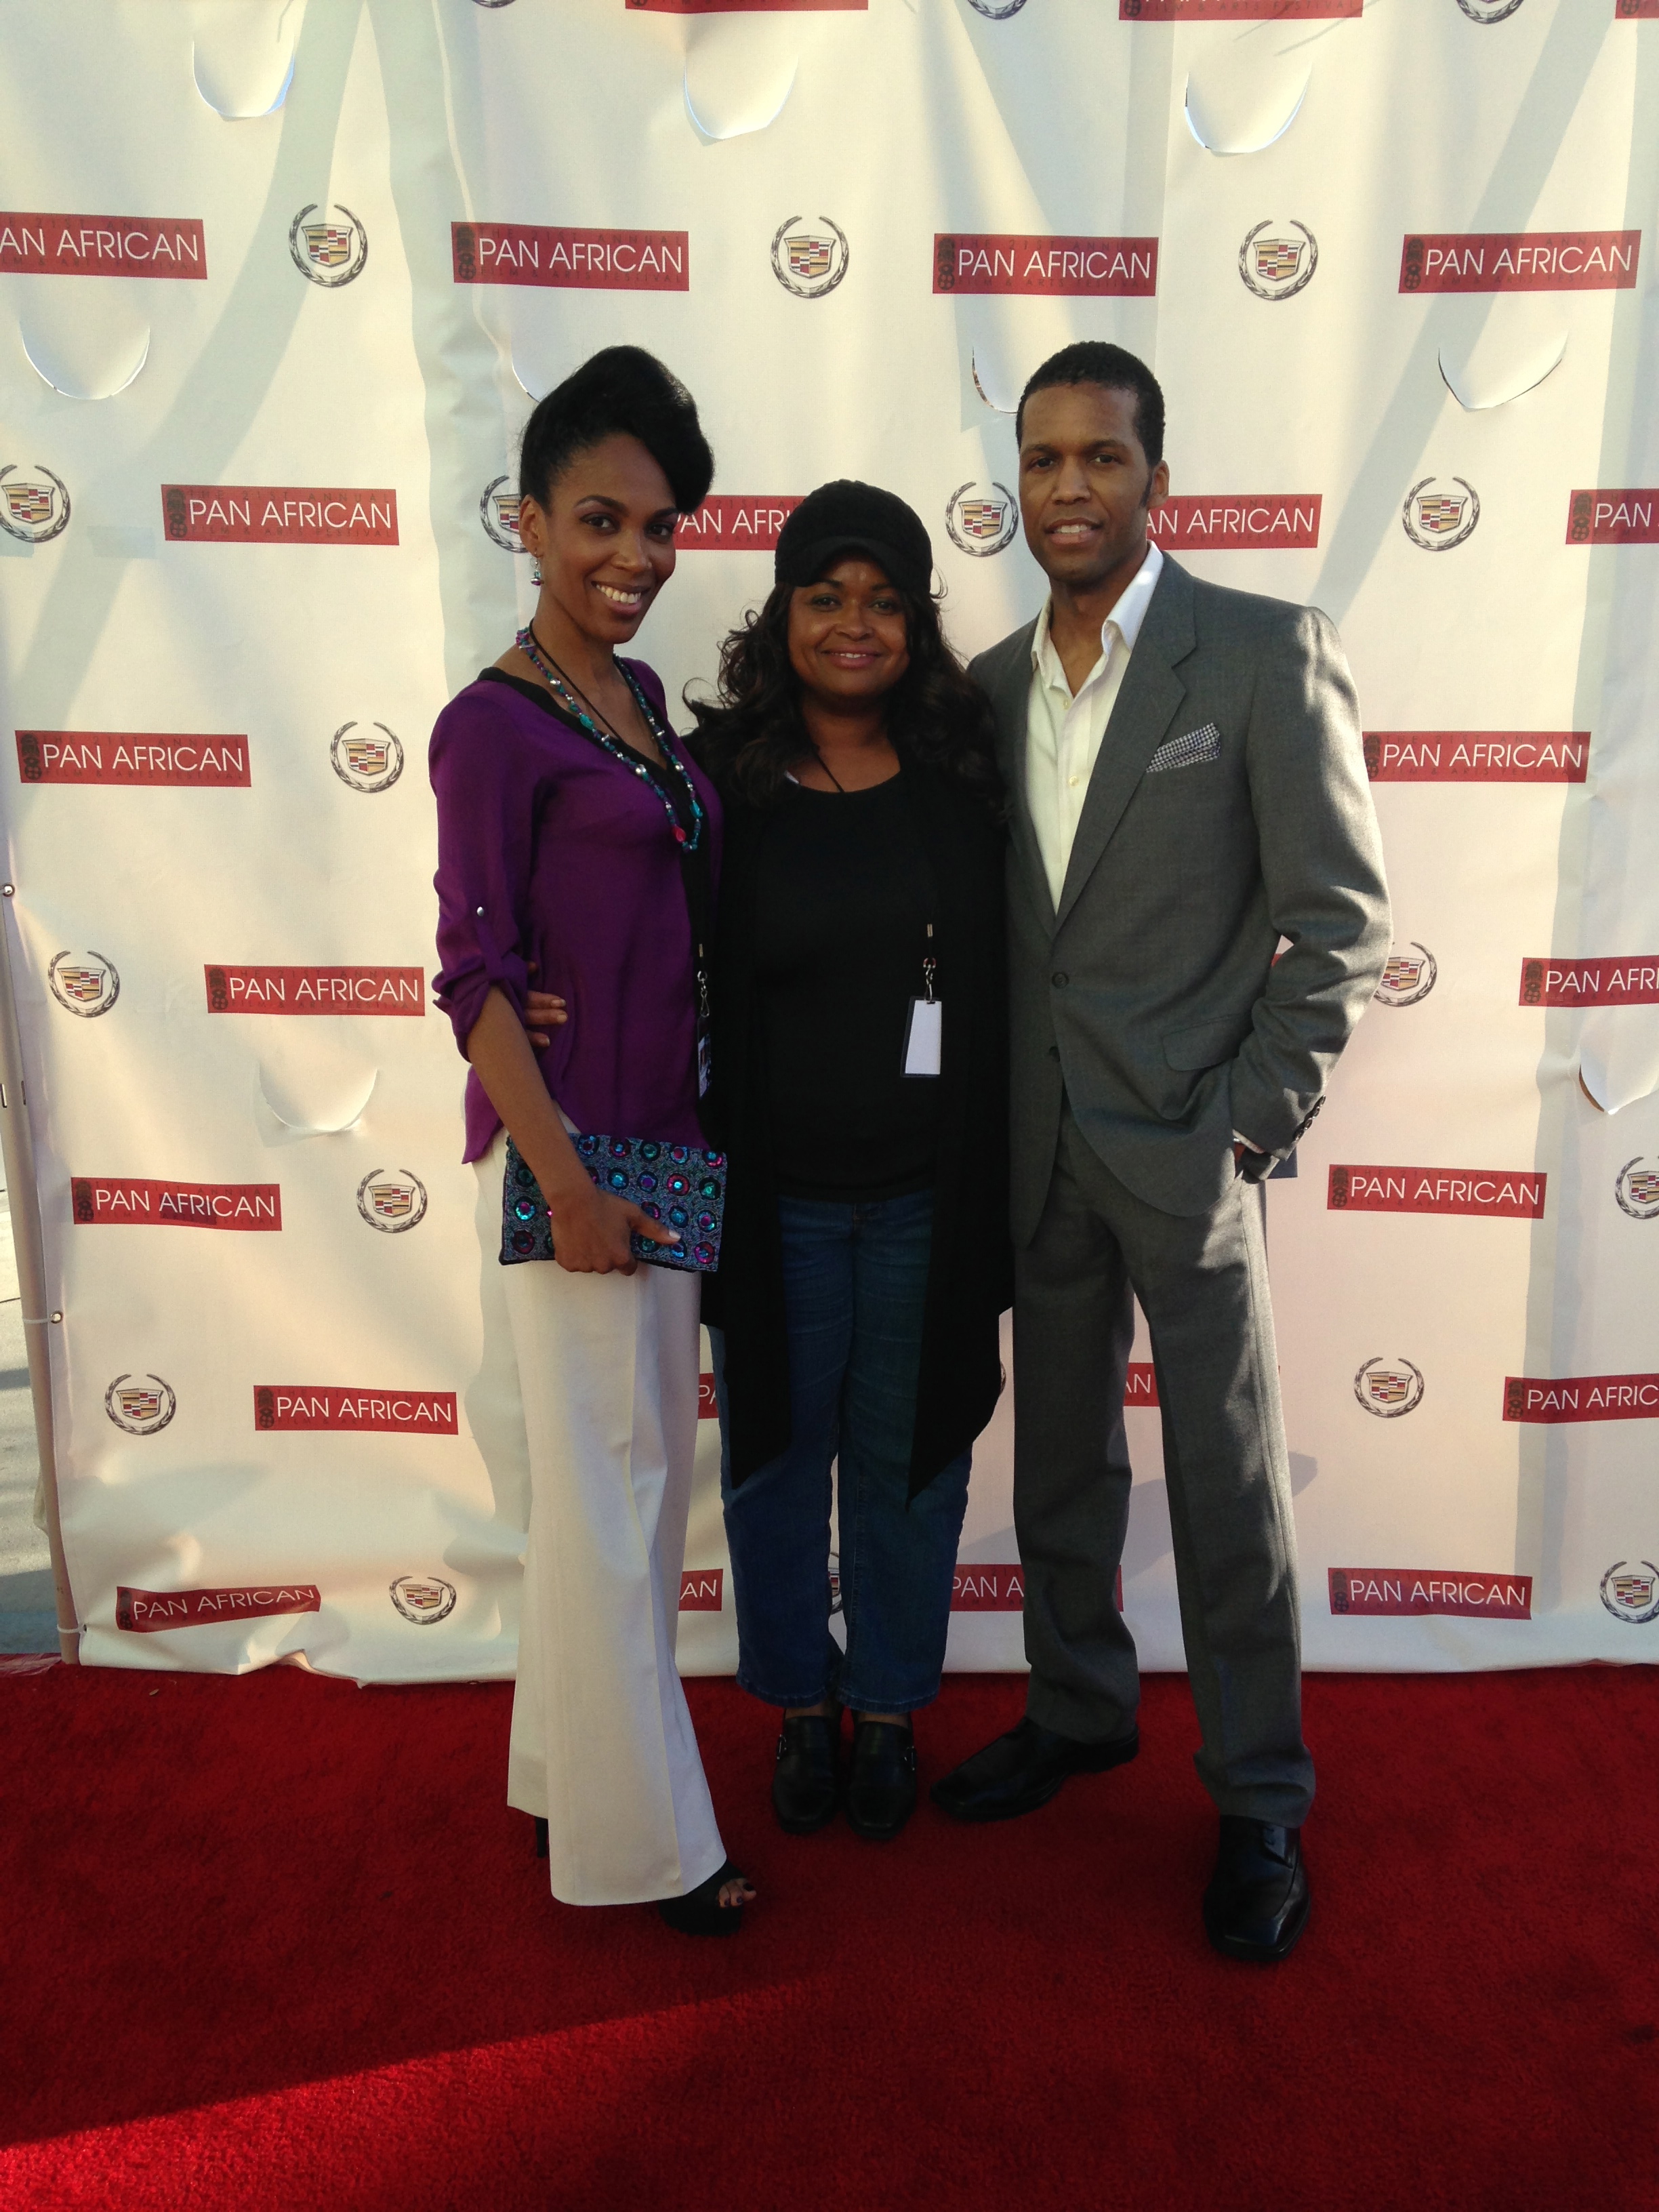 Cast of 'The Bedroom' (Nyesha Whitten-Wilson & Altorro Prince Black) at the Pan African Film Festival Premiere 2013 with Director Sonya Dunn